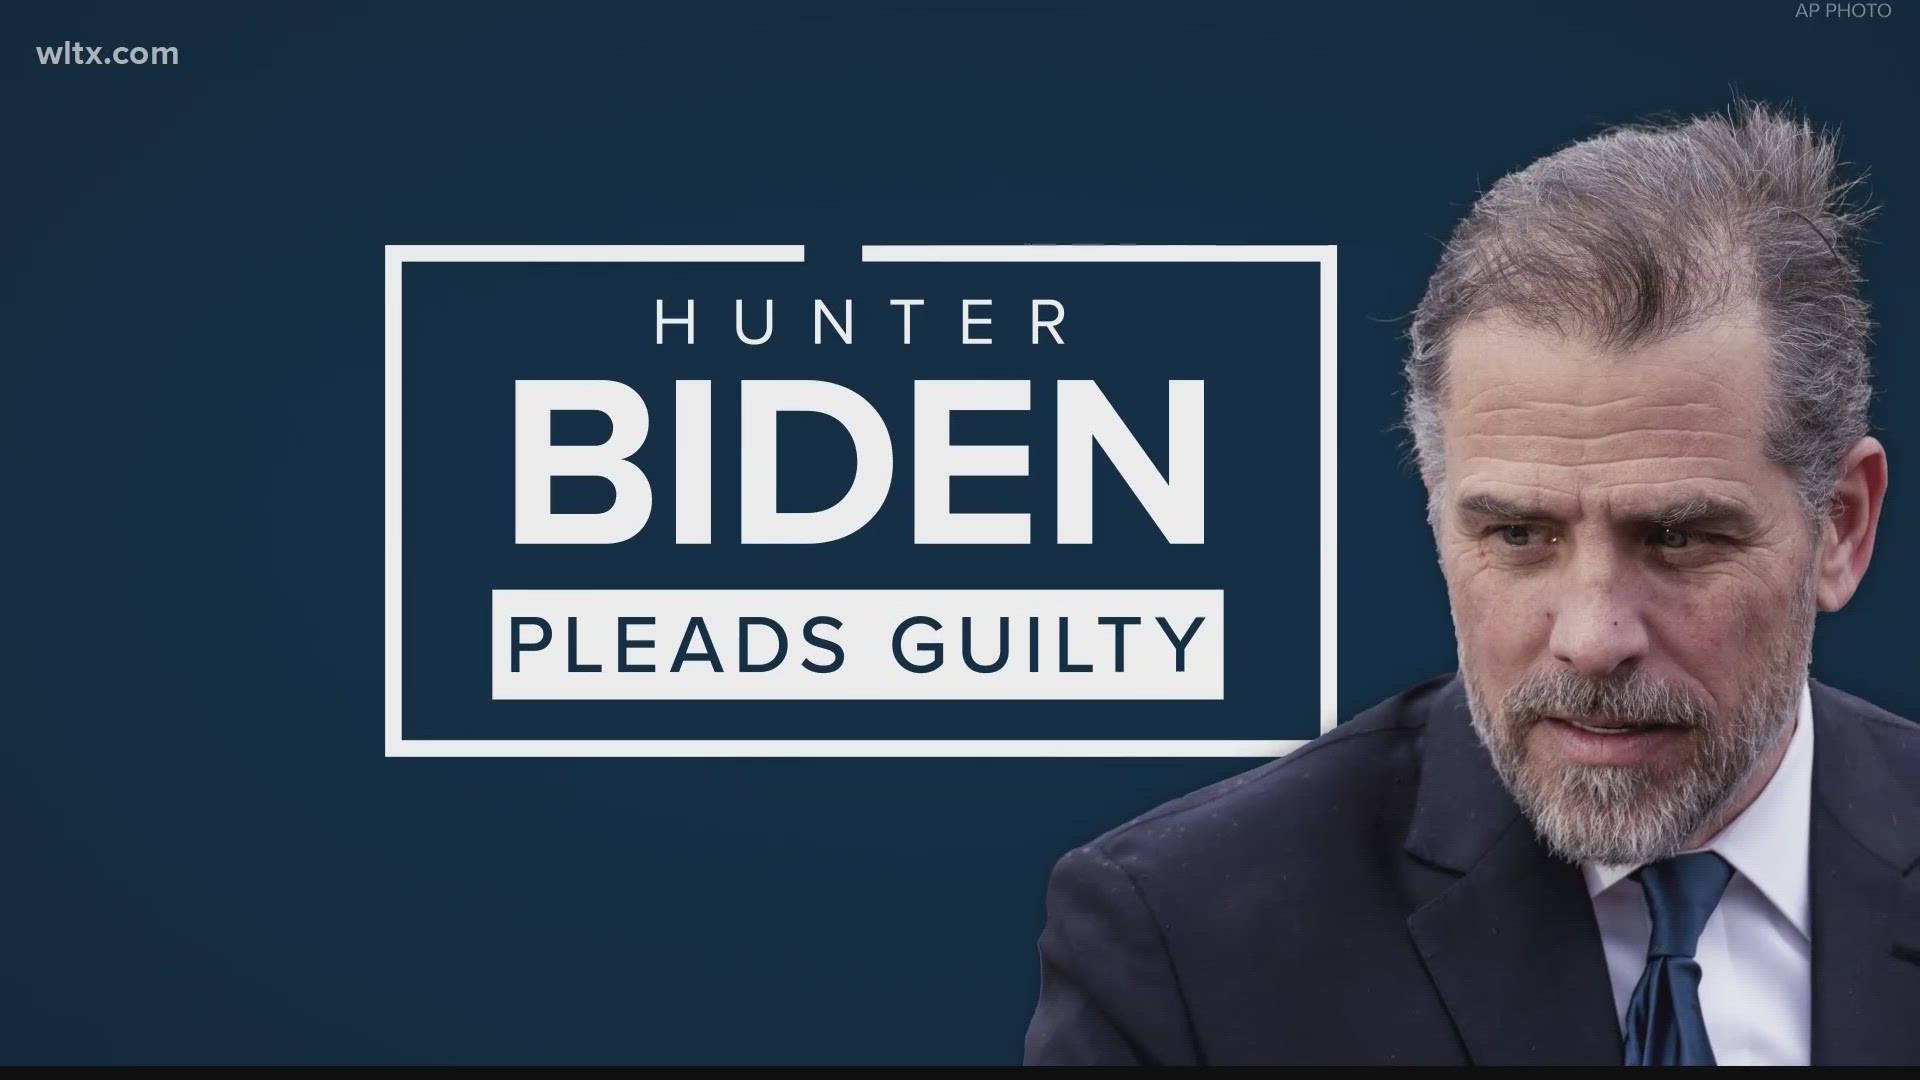 Hunter Biden, 53, will plead guilty to the misdemeanor tax offenses as part of an agreement made public Tuesday.